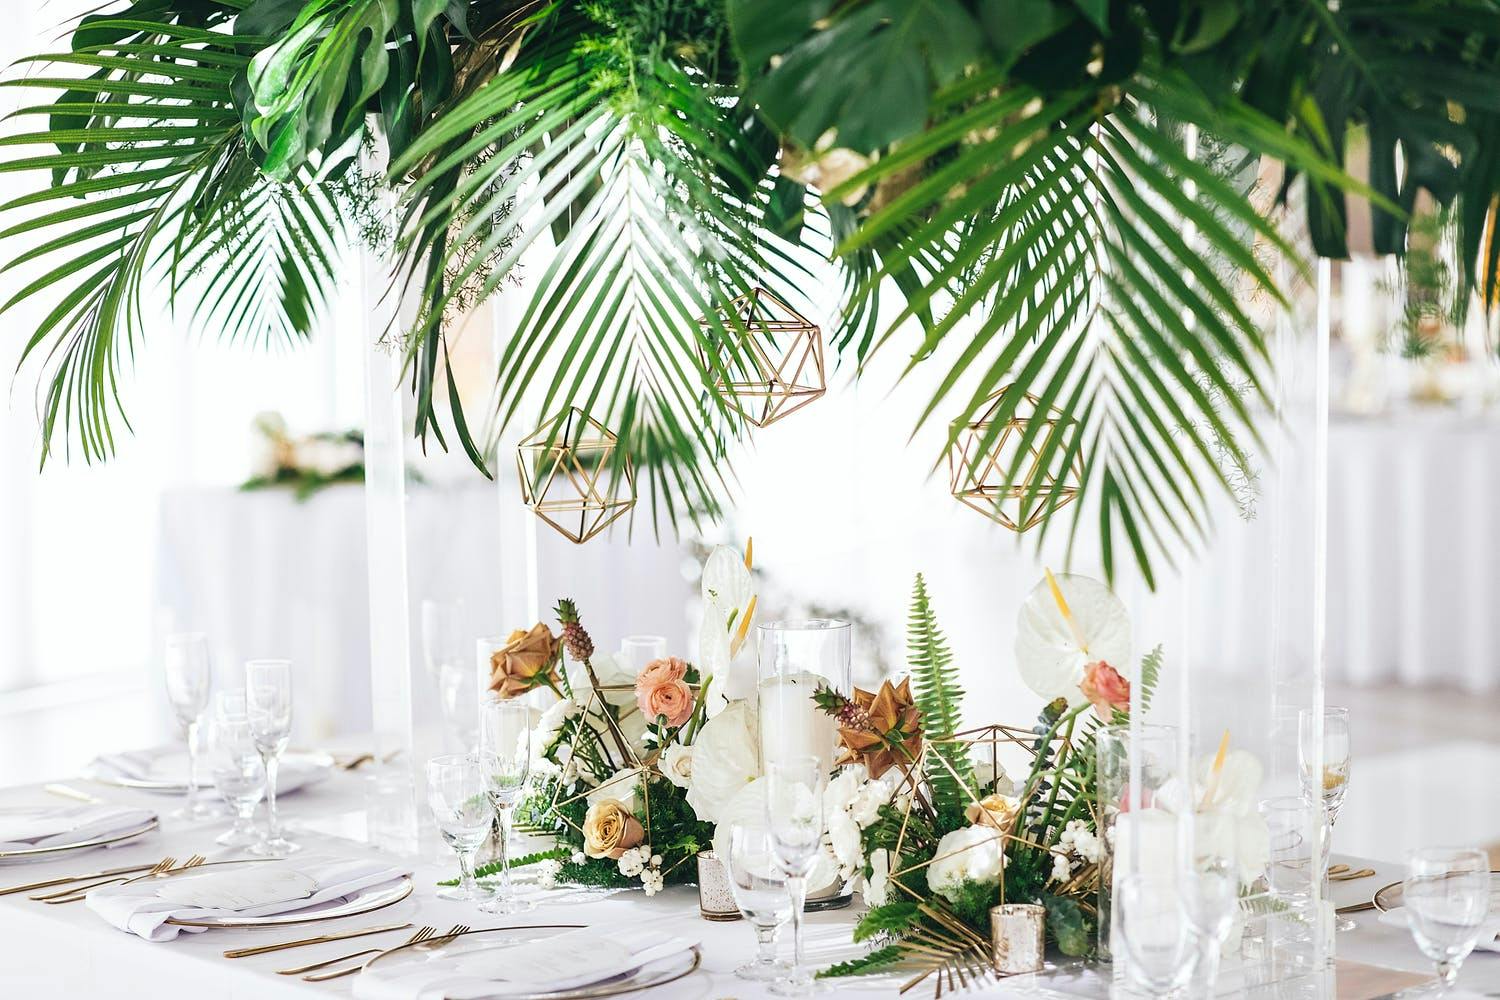 Wedding Centerpiece With Gold Geometric Terrariums (and Vibrant Tropical Foliage) | PartySlate